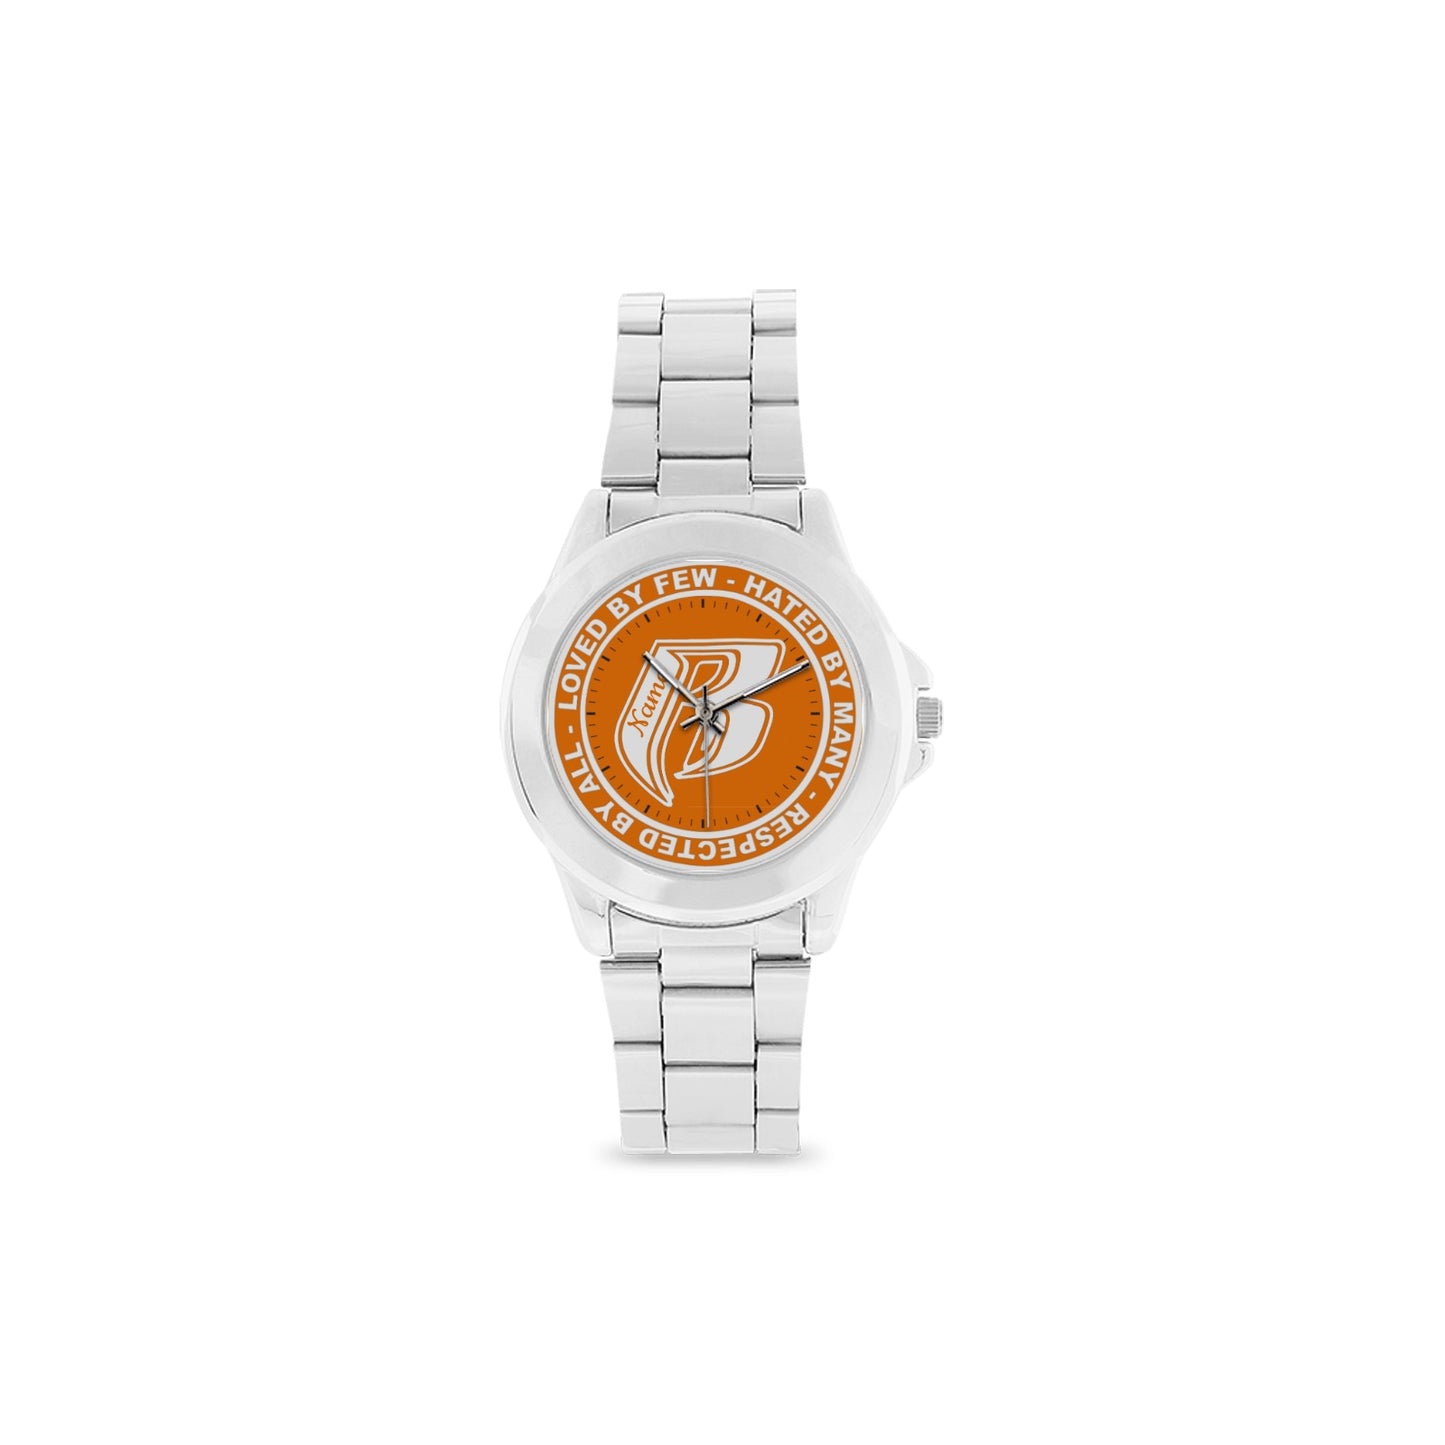 RR Unisex Stainless Steel Watch Orange - Add your name.